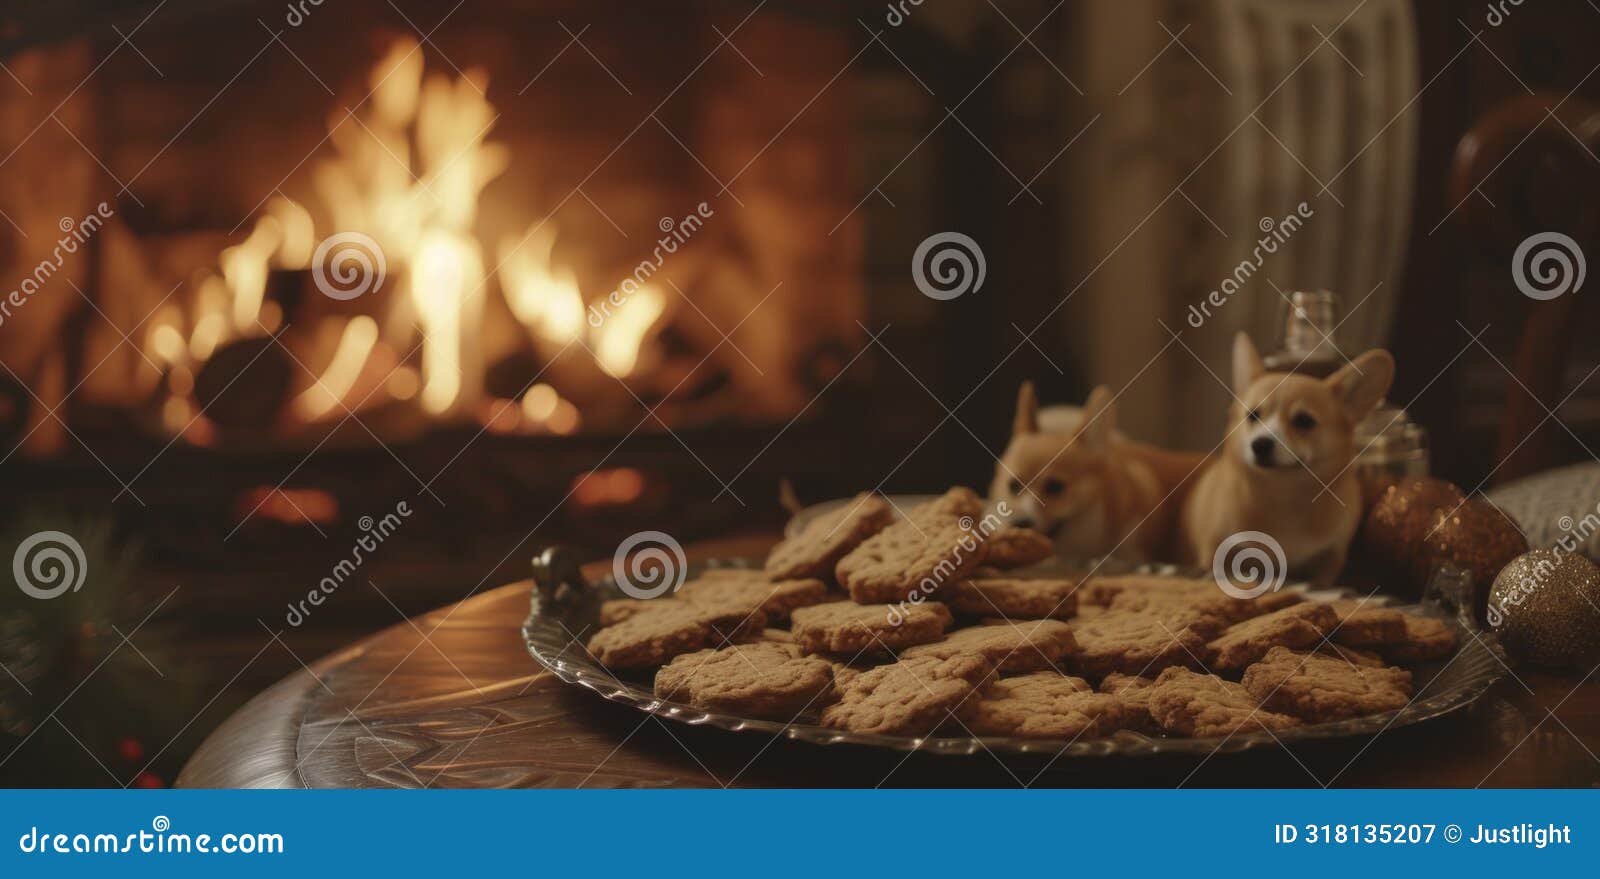 a nostalgic scene of oldfashioned corgi cookies arranged on a vintage tray against the flickering flames of a fireplace